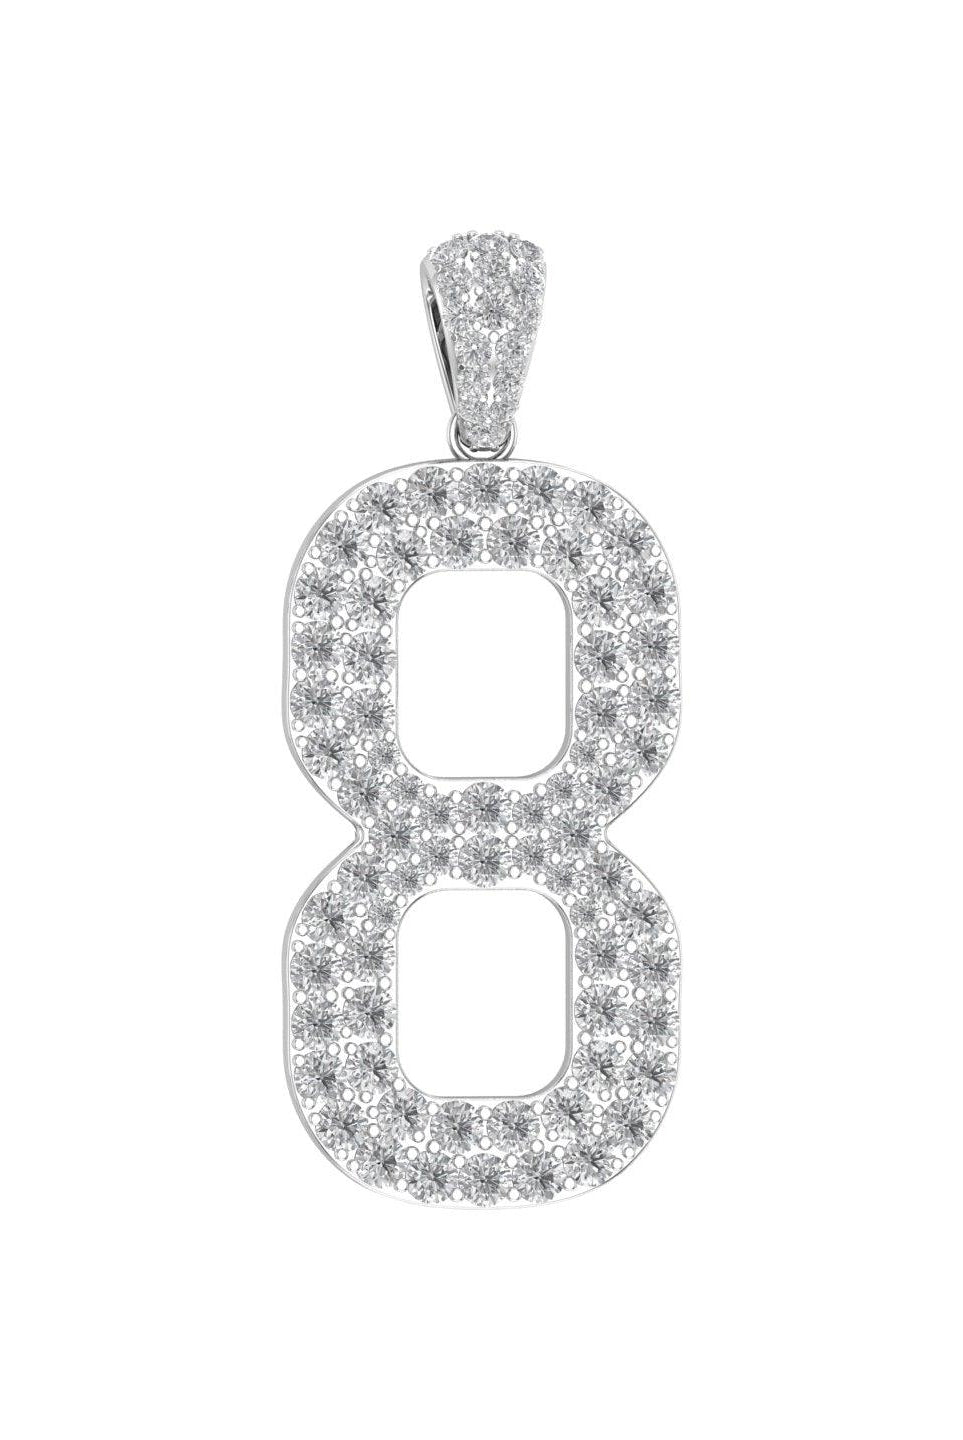 White Gold Color Pendant in the Shape of 8 Made of 925 Sterling Silver Material with 20 Inch Long Silver Chain